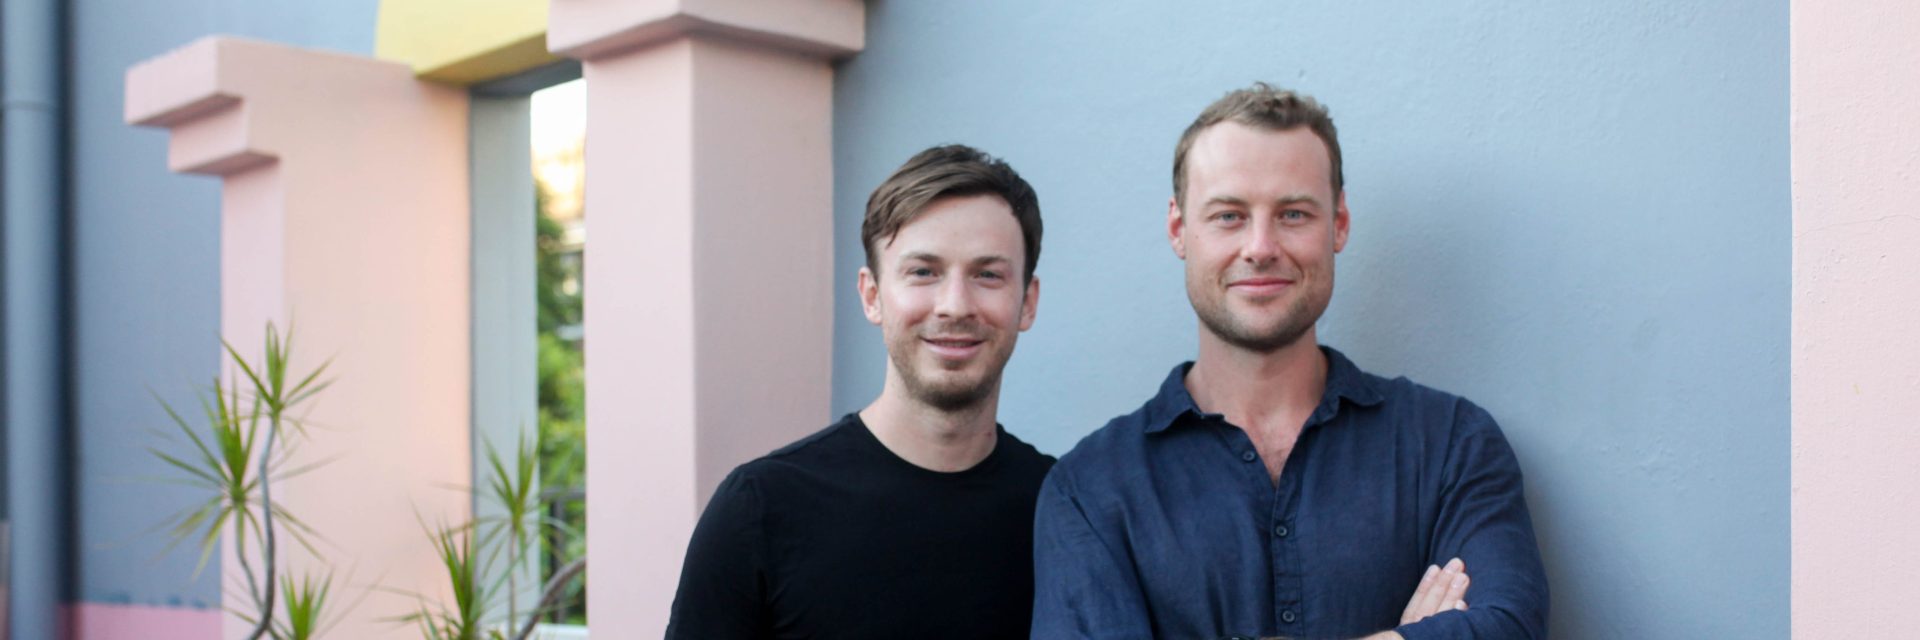 OwnHome Co-founders James Bowe and Tim Harley